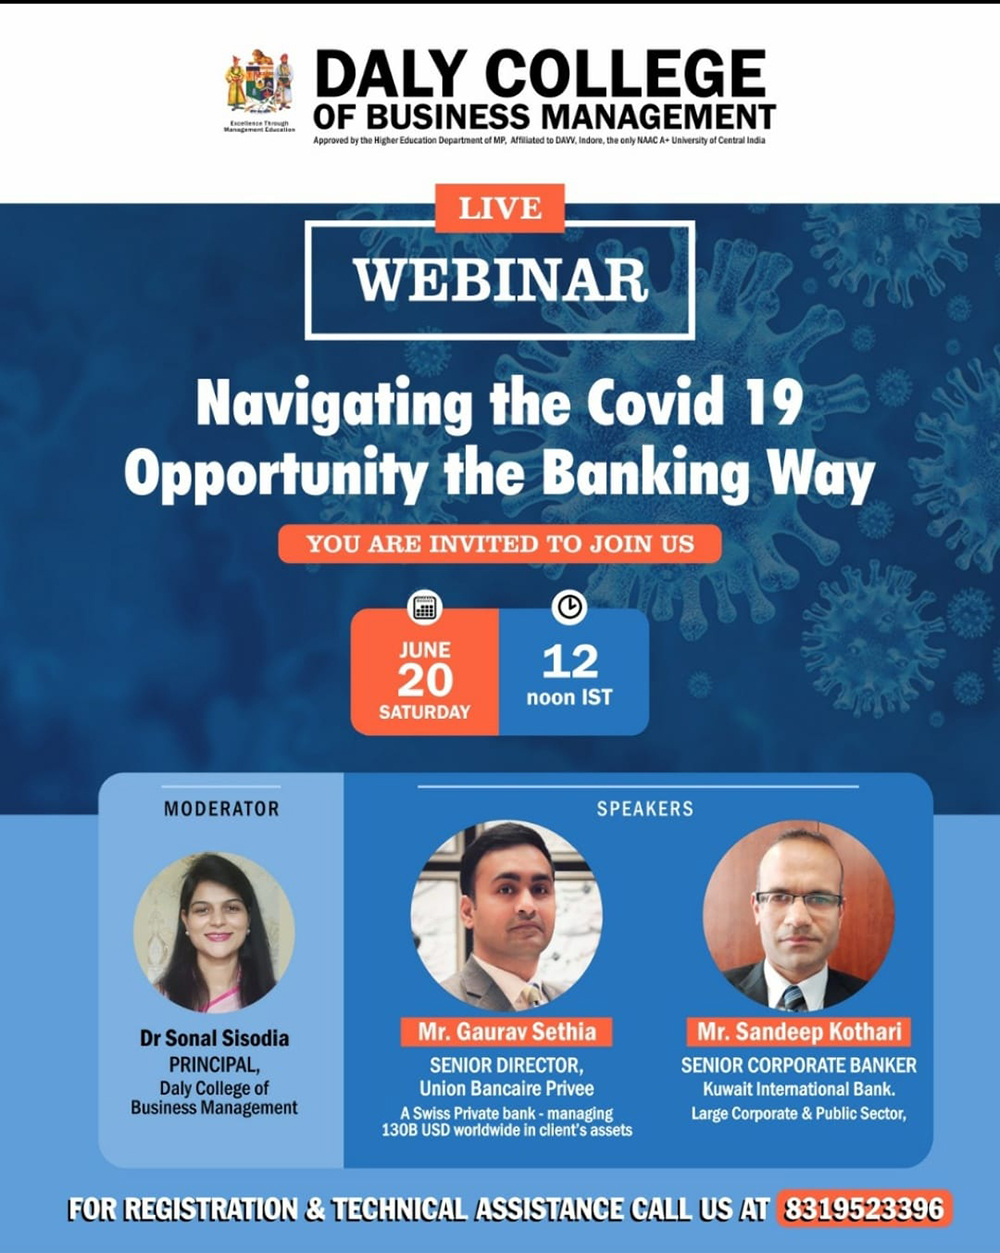 Navigating the Covid 19 Opportunity the Banking Way